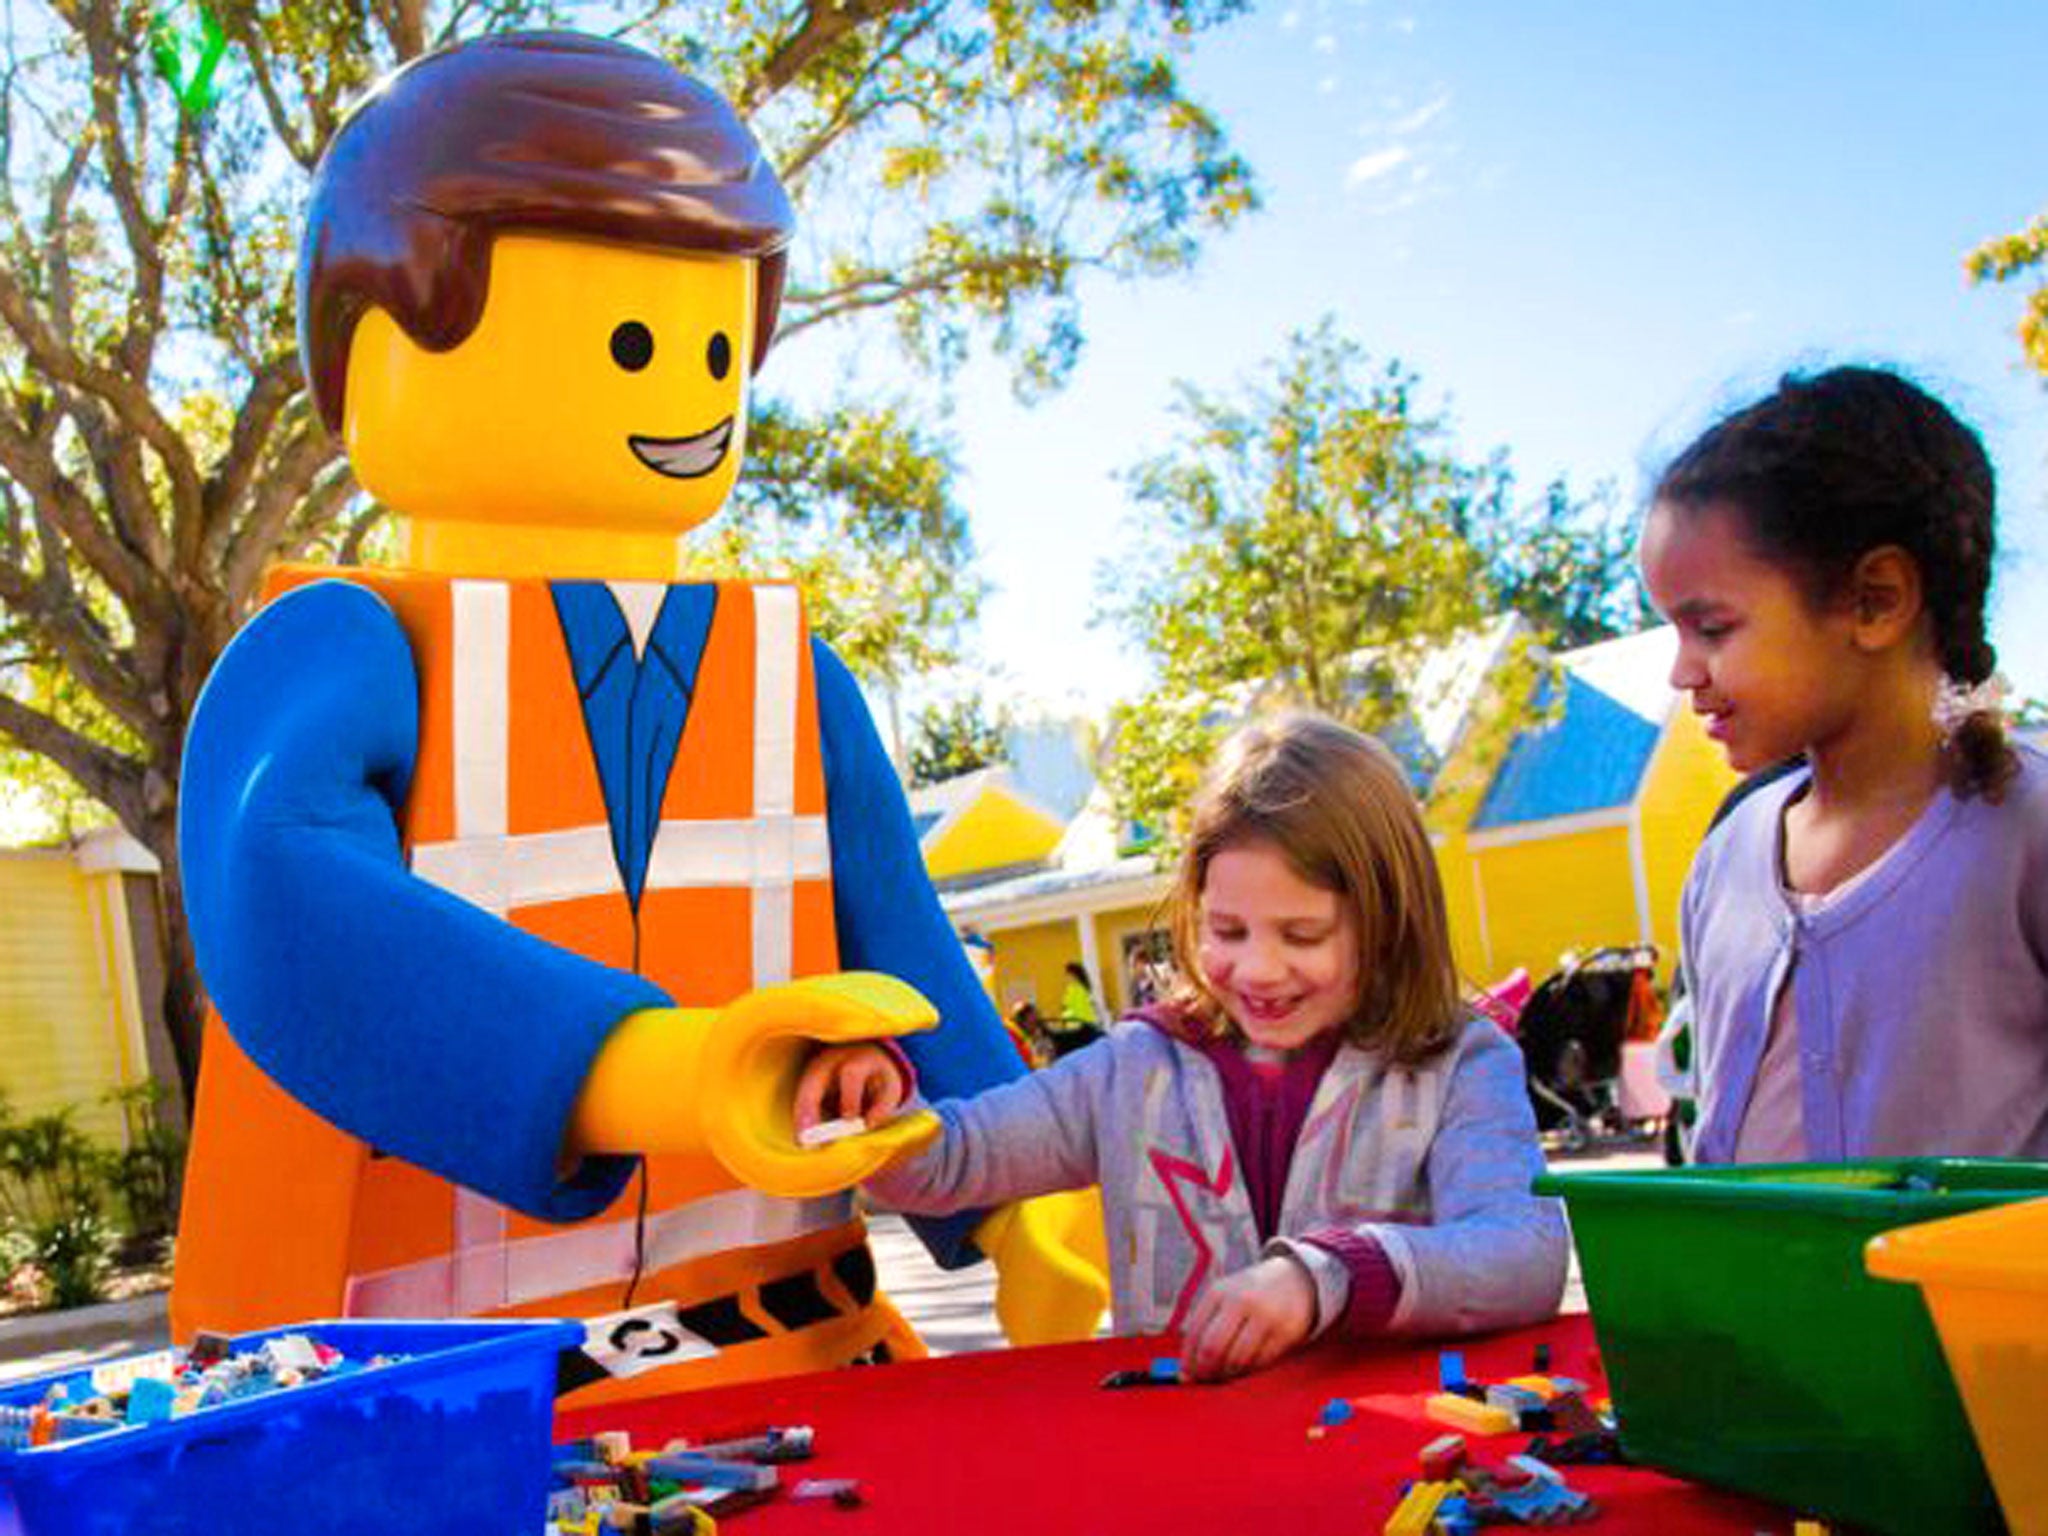 Next weekend, the stars of The Lego Movie will be dropping in to Legoland Windsor Resort to open the 2014 season